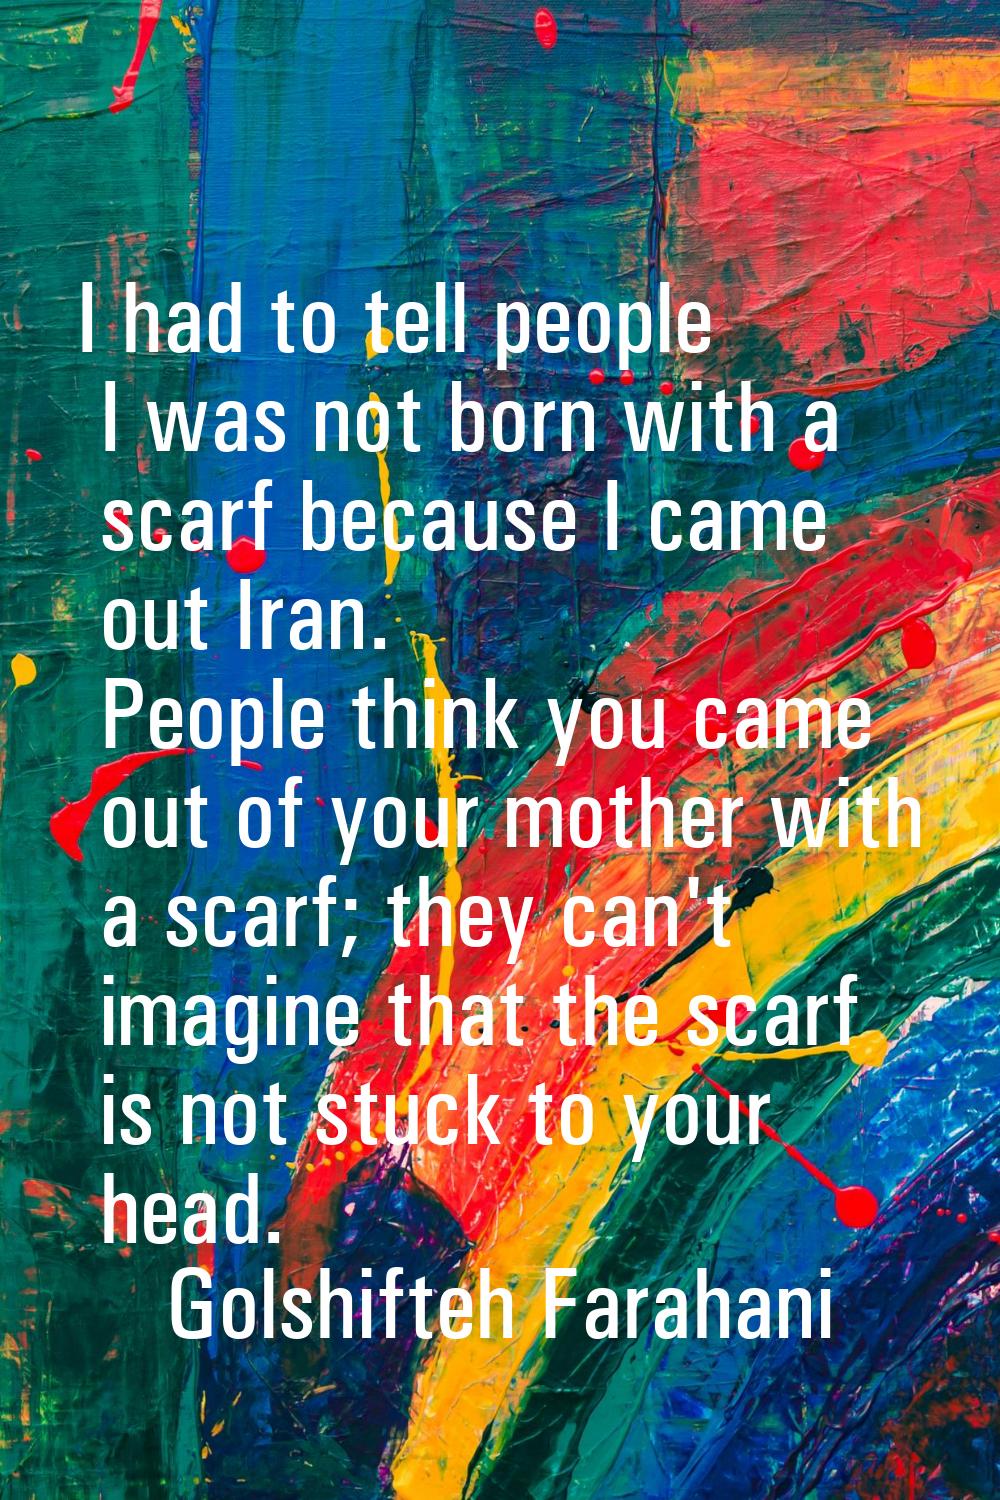 I had to tell people I was not born with a scarf because I came out Iran. People think you came out